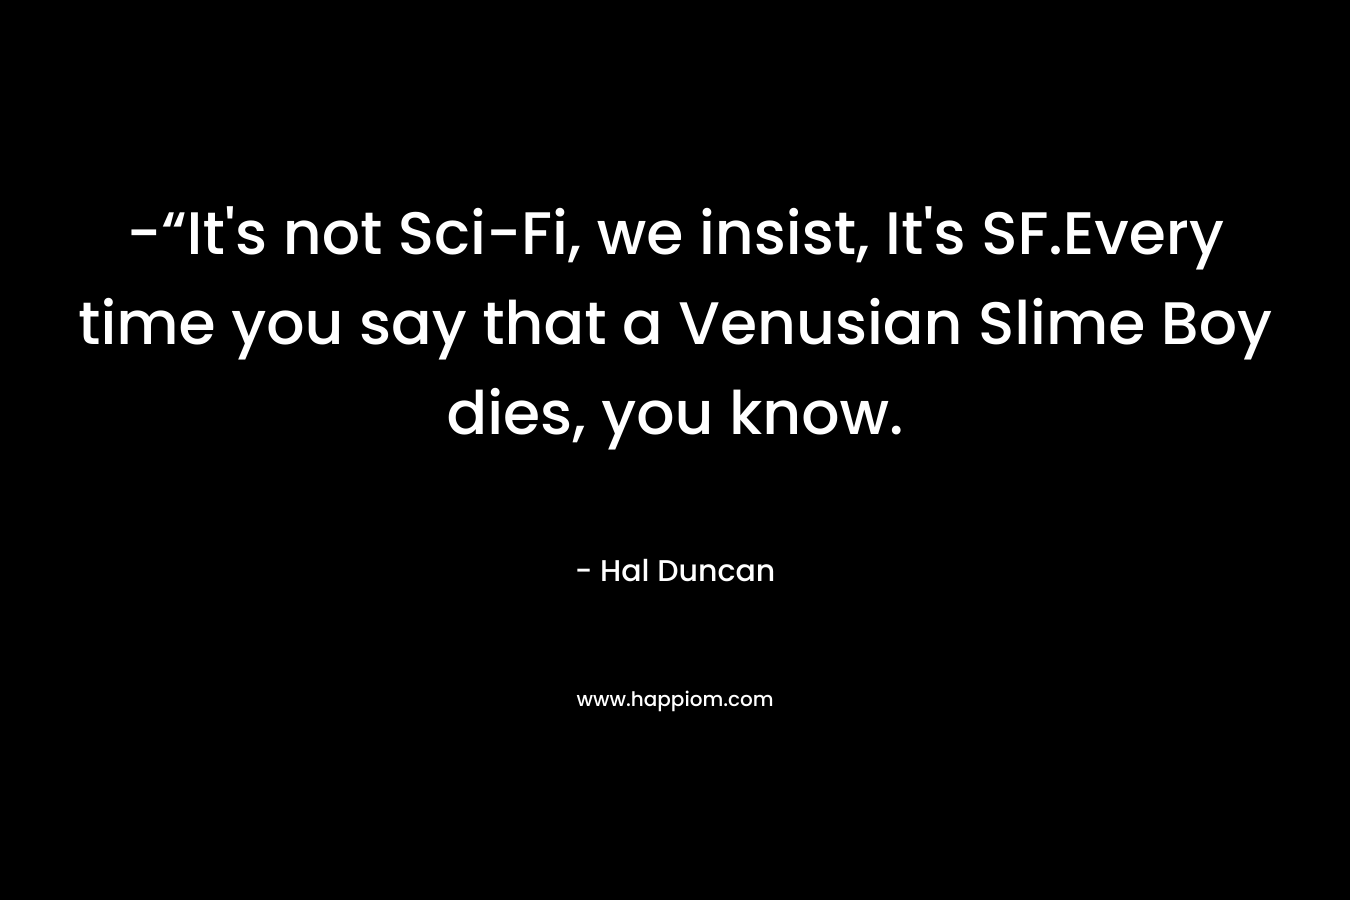 -“It’s not Sci-Fi, we insist, It’s SF.Every time you say that a Venusian Slime Boy dies, you know. – Hal Duncan